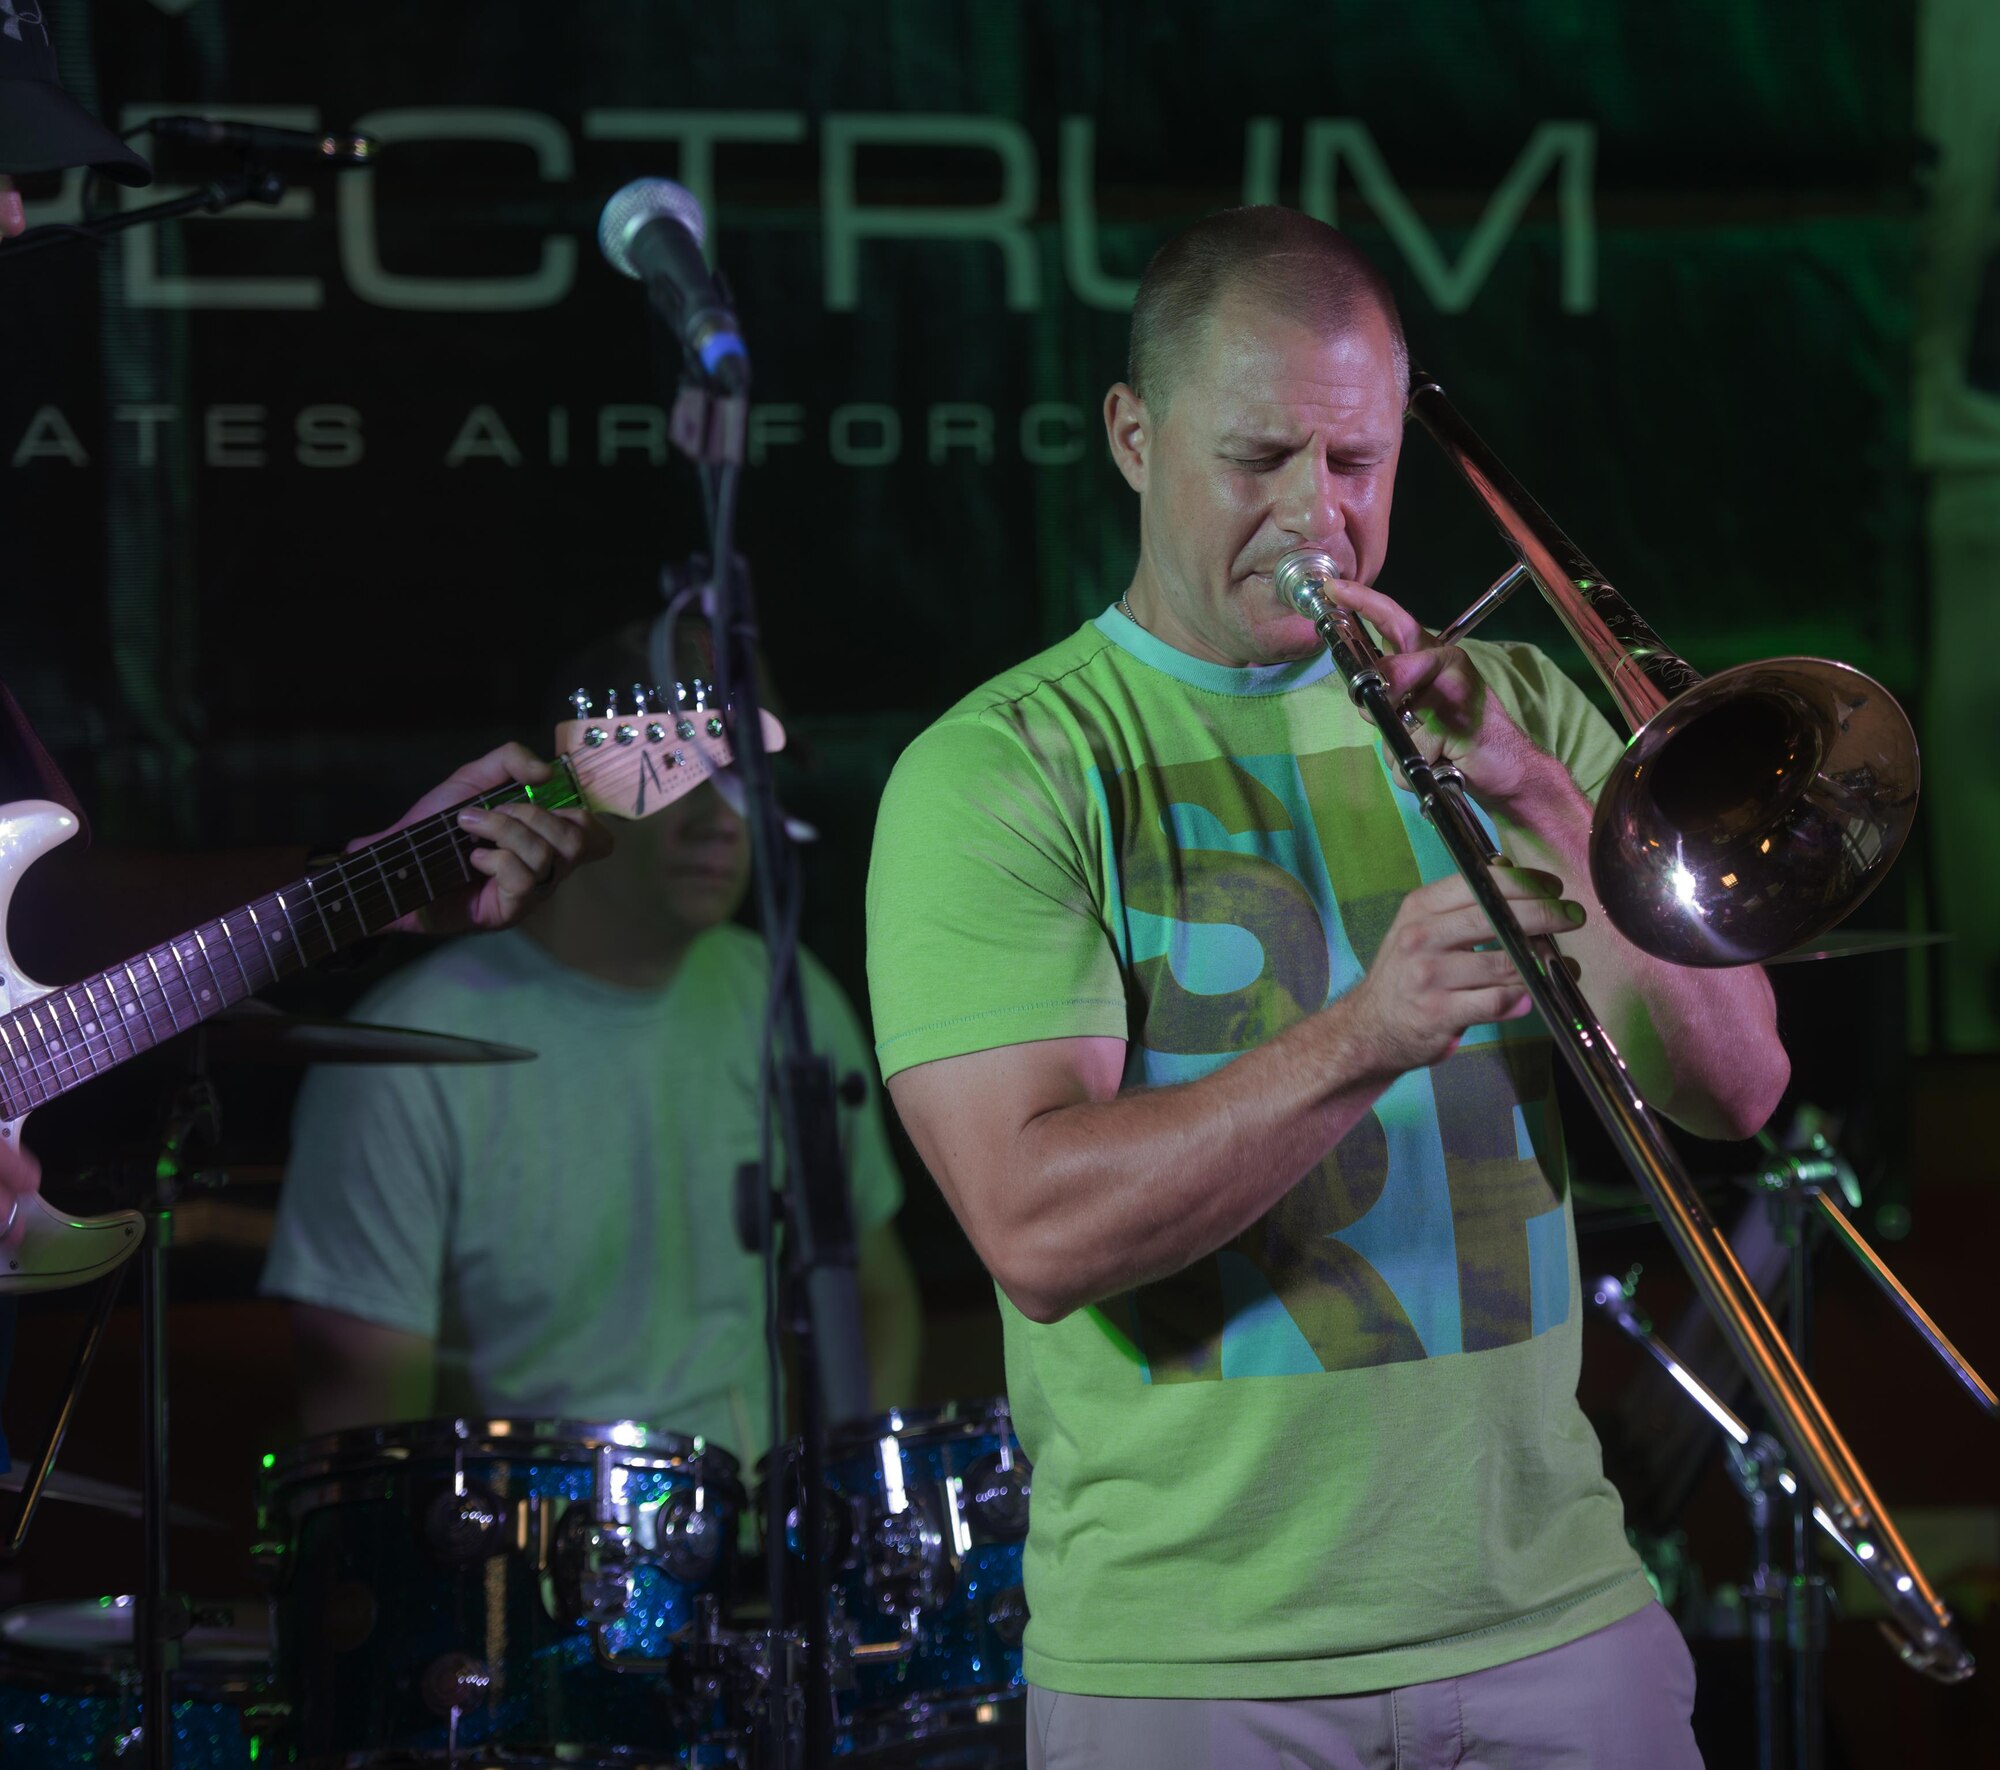 Staff Sgt. Trent Lockheart, a trombone player with the U.S. Air Force’s Central Command Band, Full Spectrum, performs at the Fox Sports Lounge at Al Udeid Air Base, Qatar Oct. 13, 2015. The performance, which featured hit songs “Uptown Funk,” “Beat It” and “Superstitious” was the band’s last before the group kicks-off a 16-day tour. (U.S. Air Force Photo/Tech. Sgt. James Hodgman)